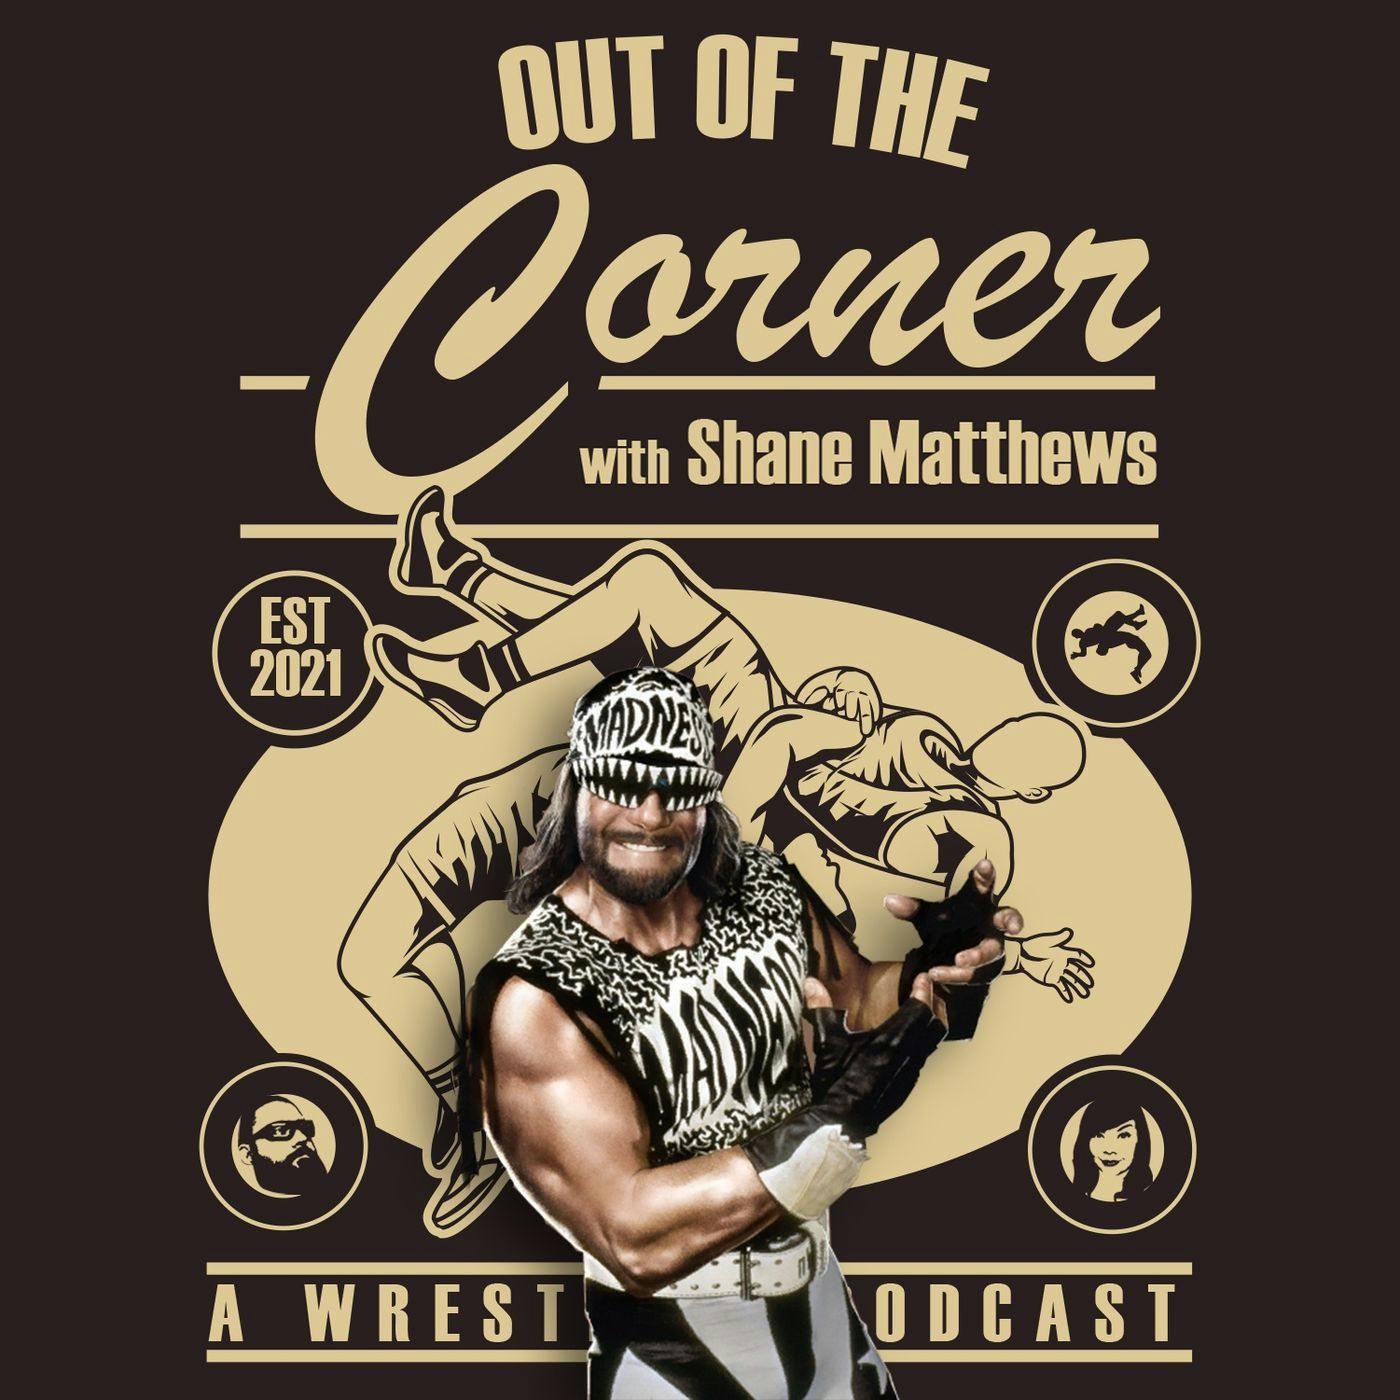 Wrestling Weather and Randy Savage